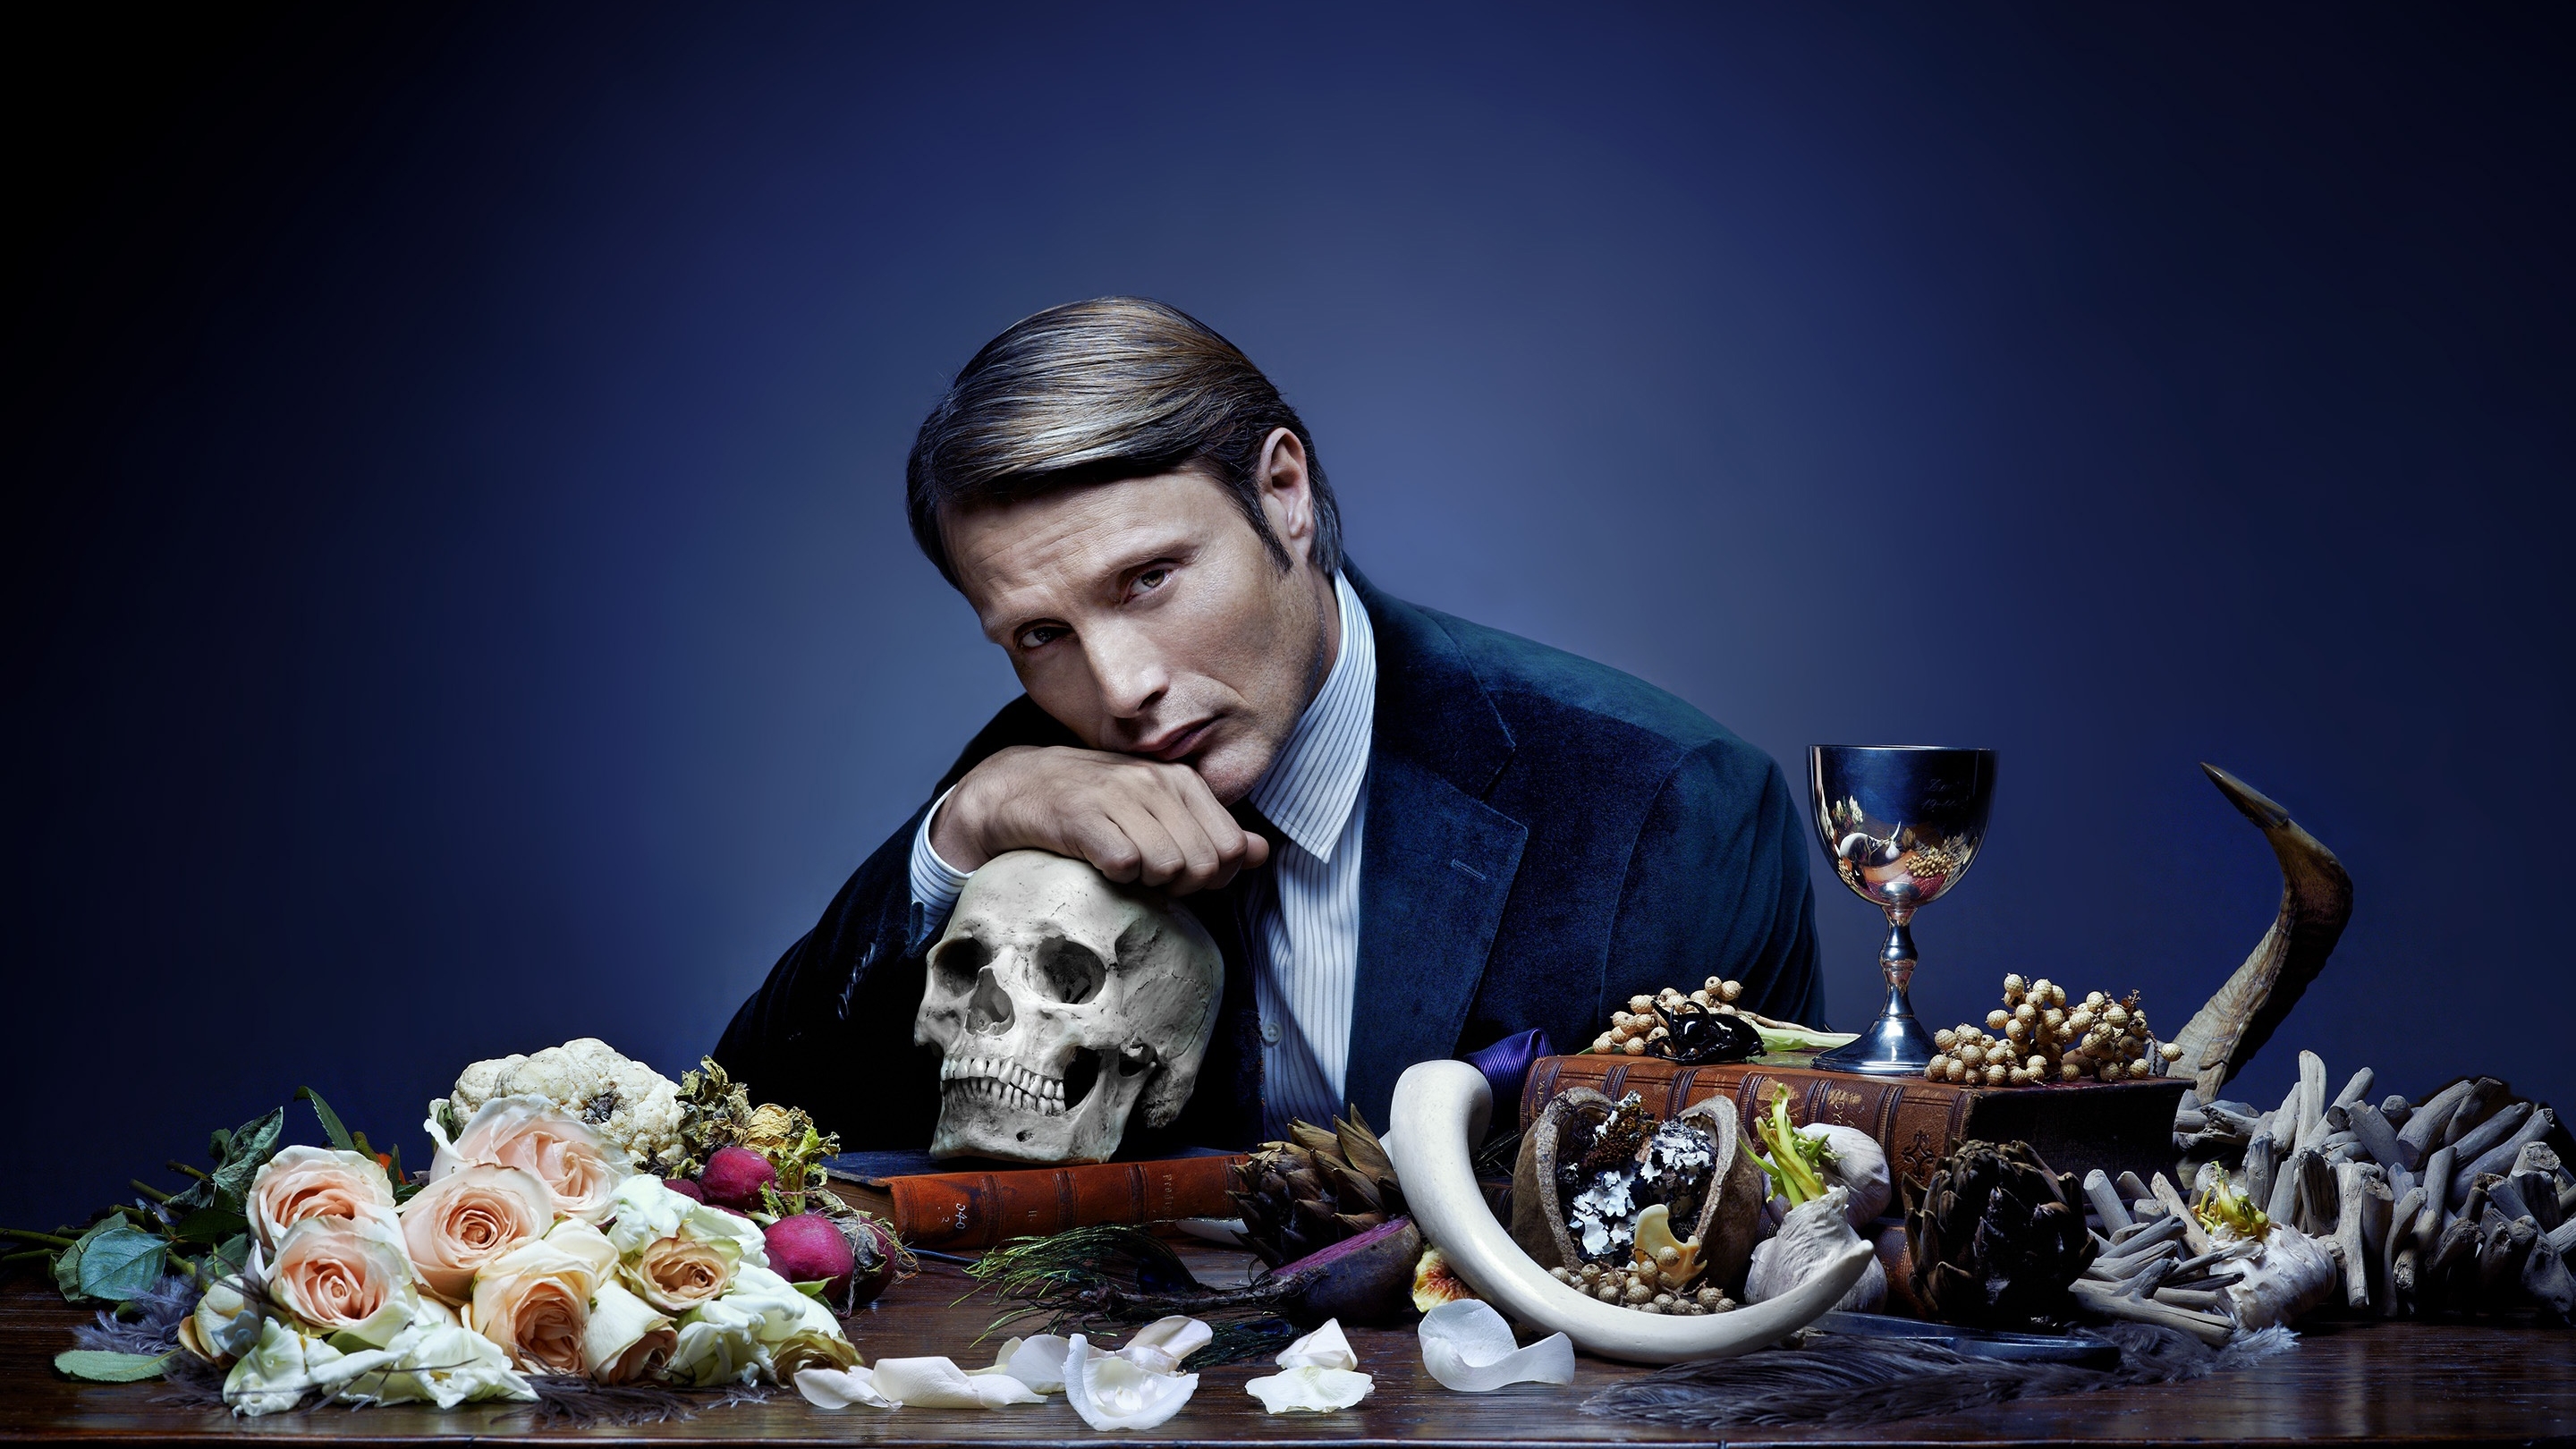 160+ Hannibal HD Wallpapers and Backgrounds